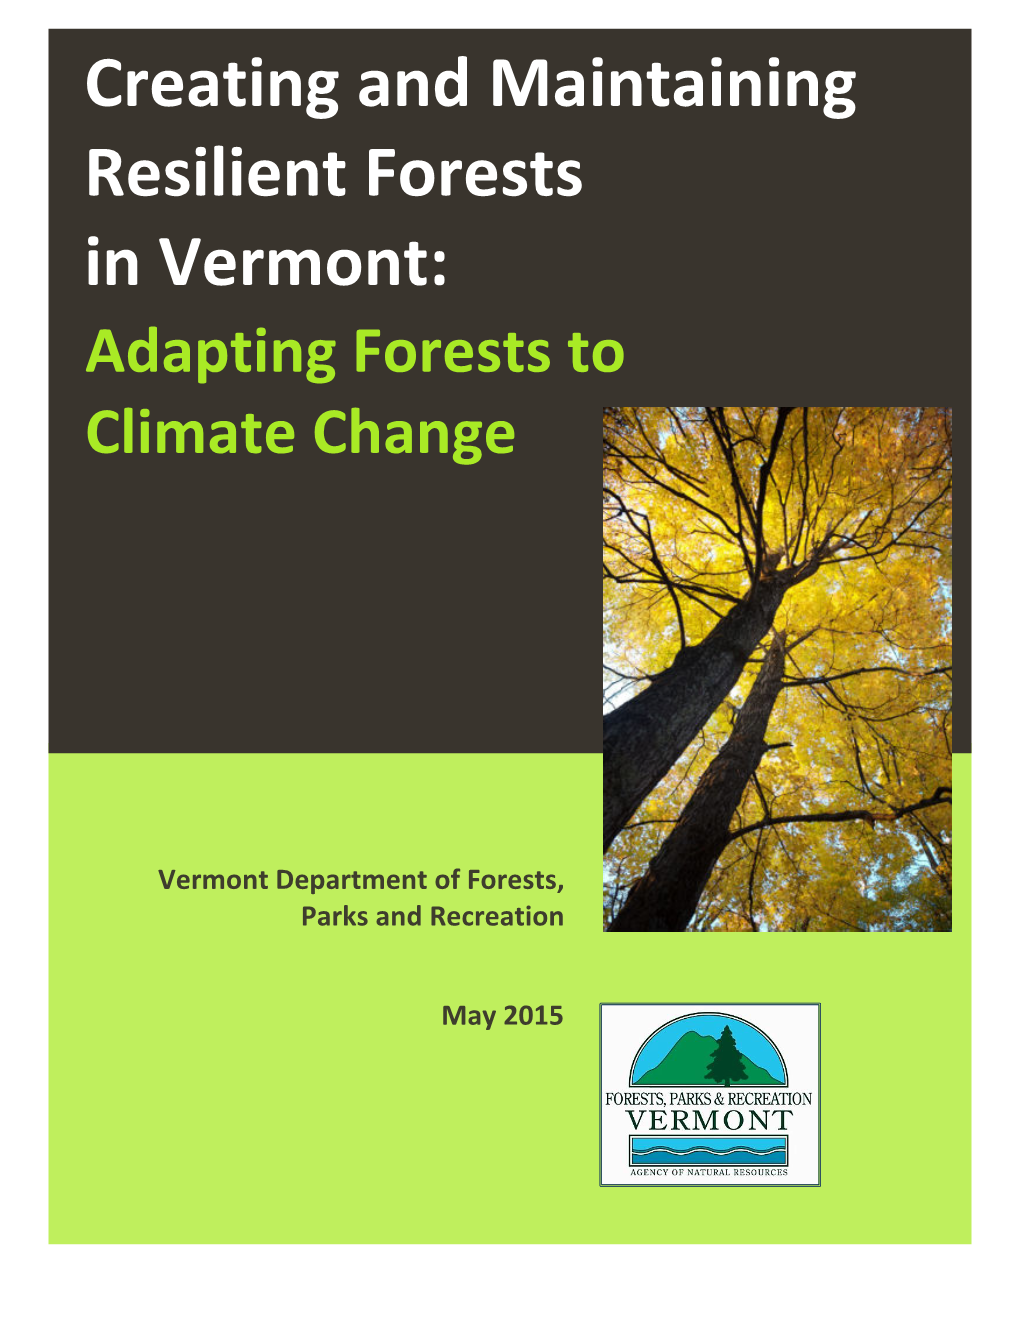 Creating and Maintaining Resilient Forests in Vermont: Adapting Forests to Climate Change